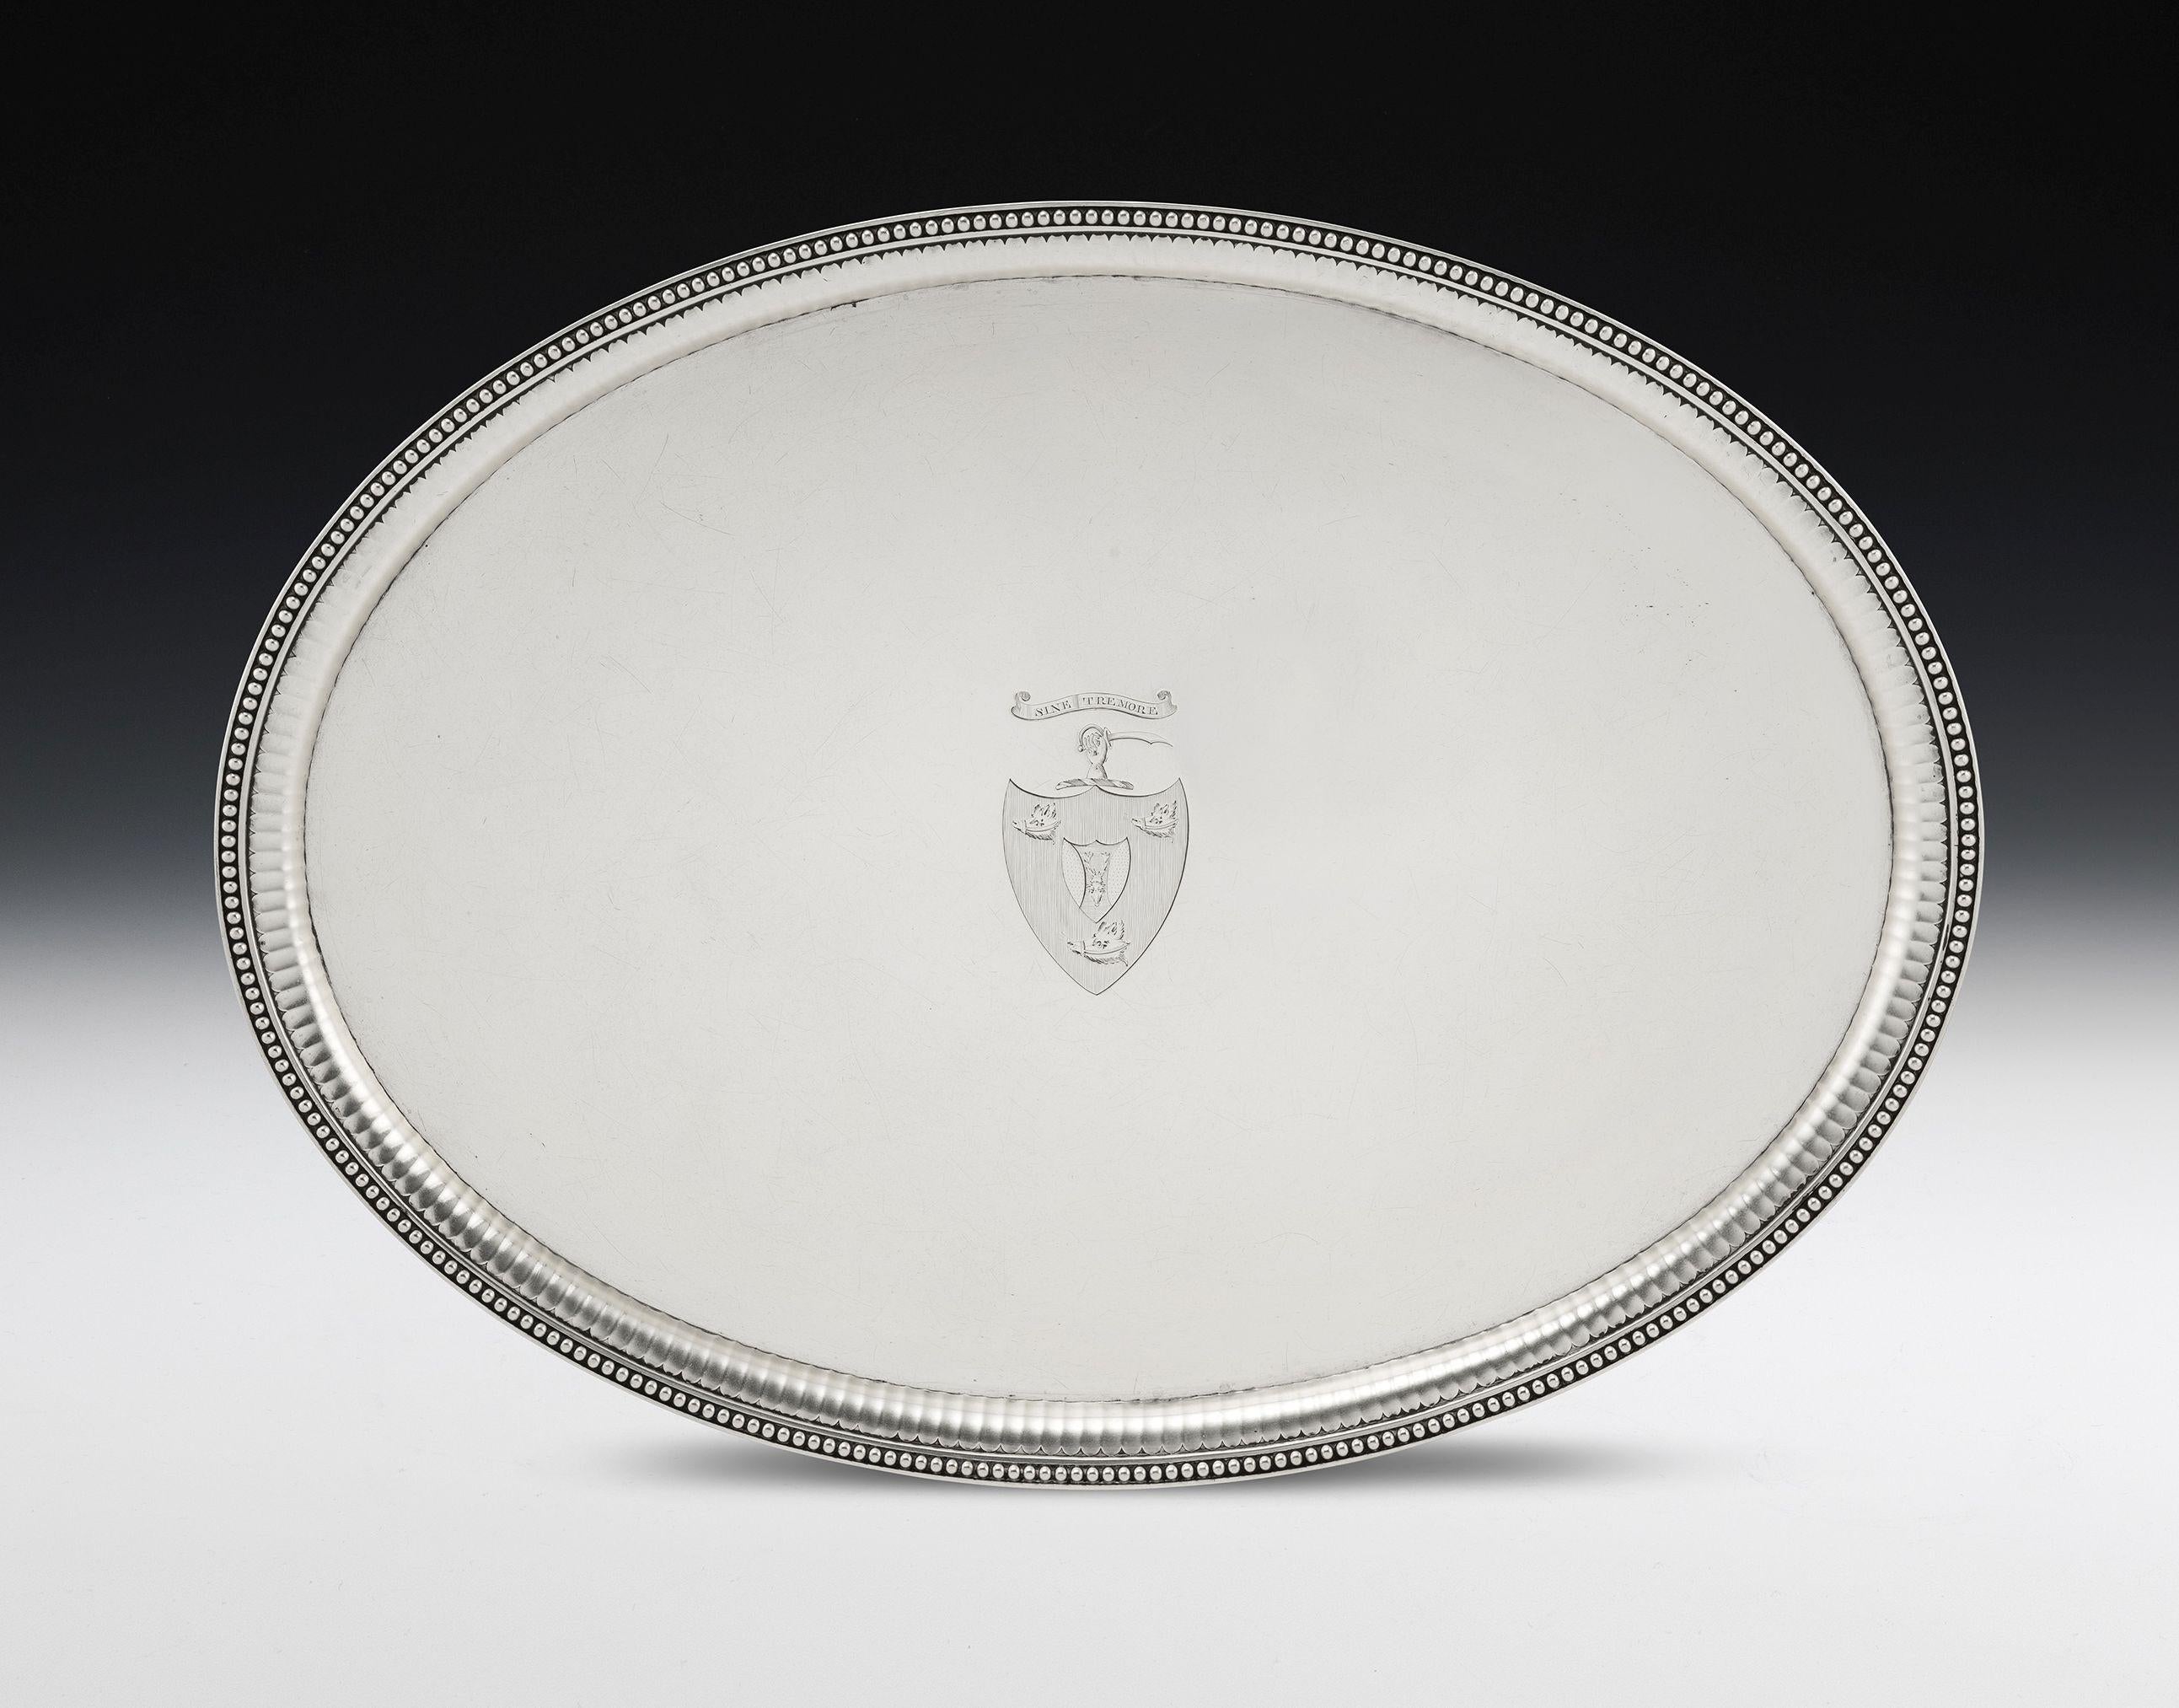 This exceptionally fine George III antique sterling silver Salver was made in London in 1781 by the Royal Silversmiths, Wakelin & Taylor. The Salver is of an unusual size and is oval in form. The raised border is beautifully decorated with flat